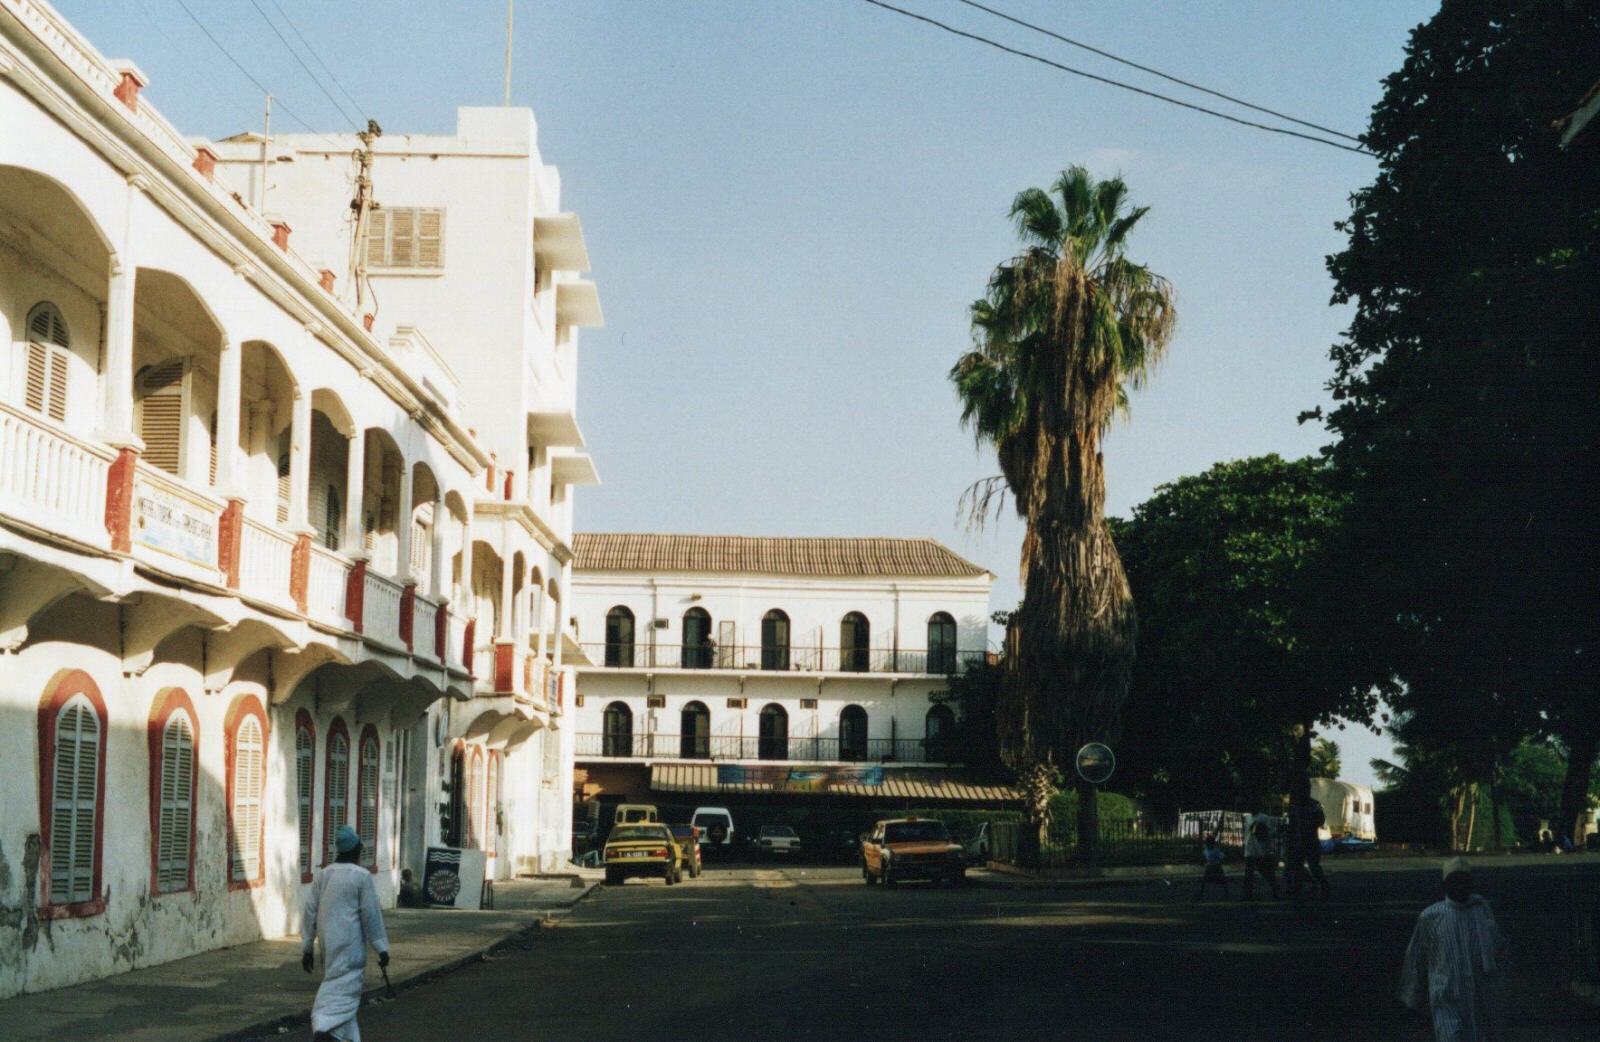 The Governor's palace and the Hotel de la Poste in St Louis, Senegal